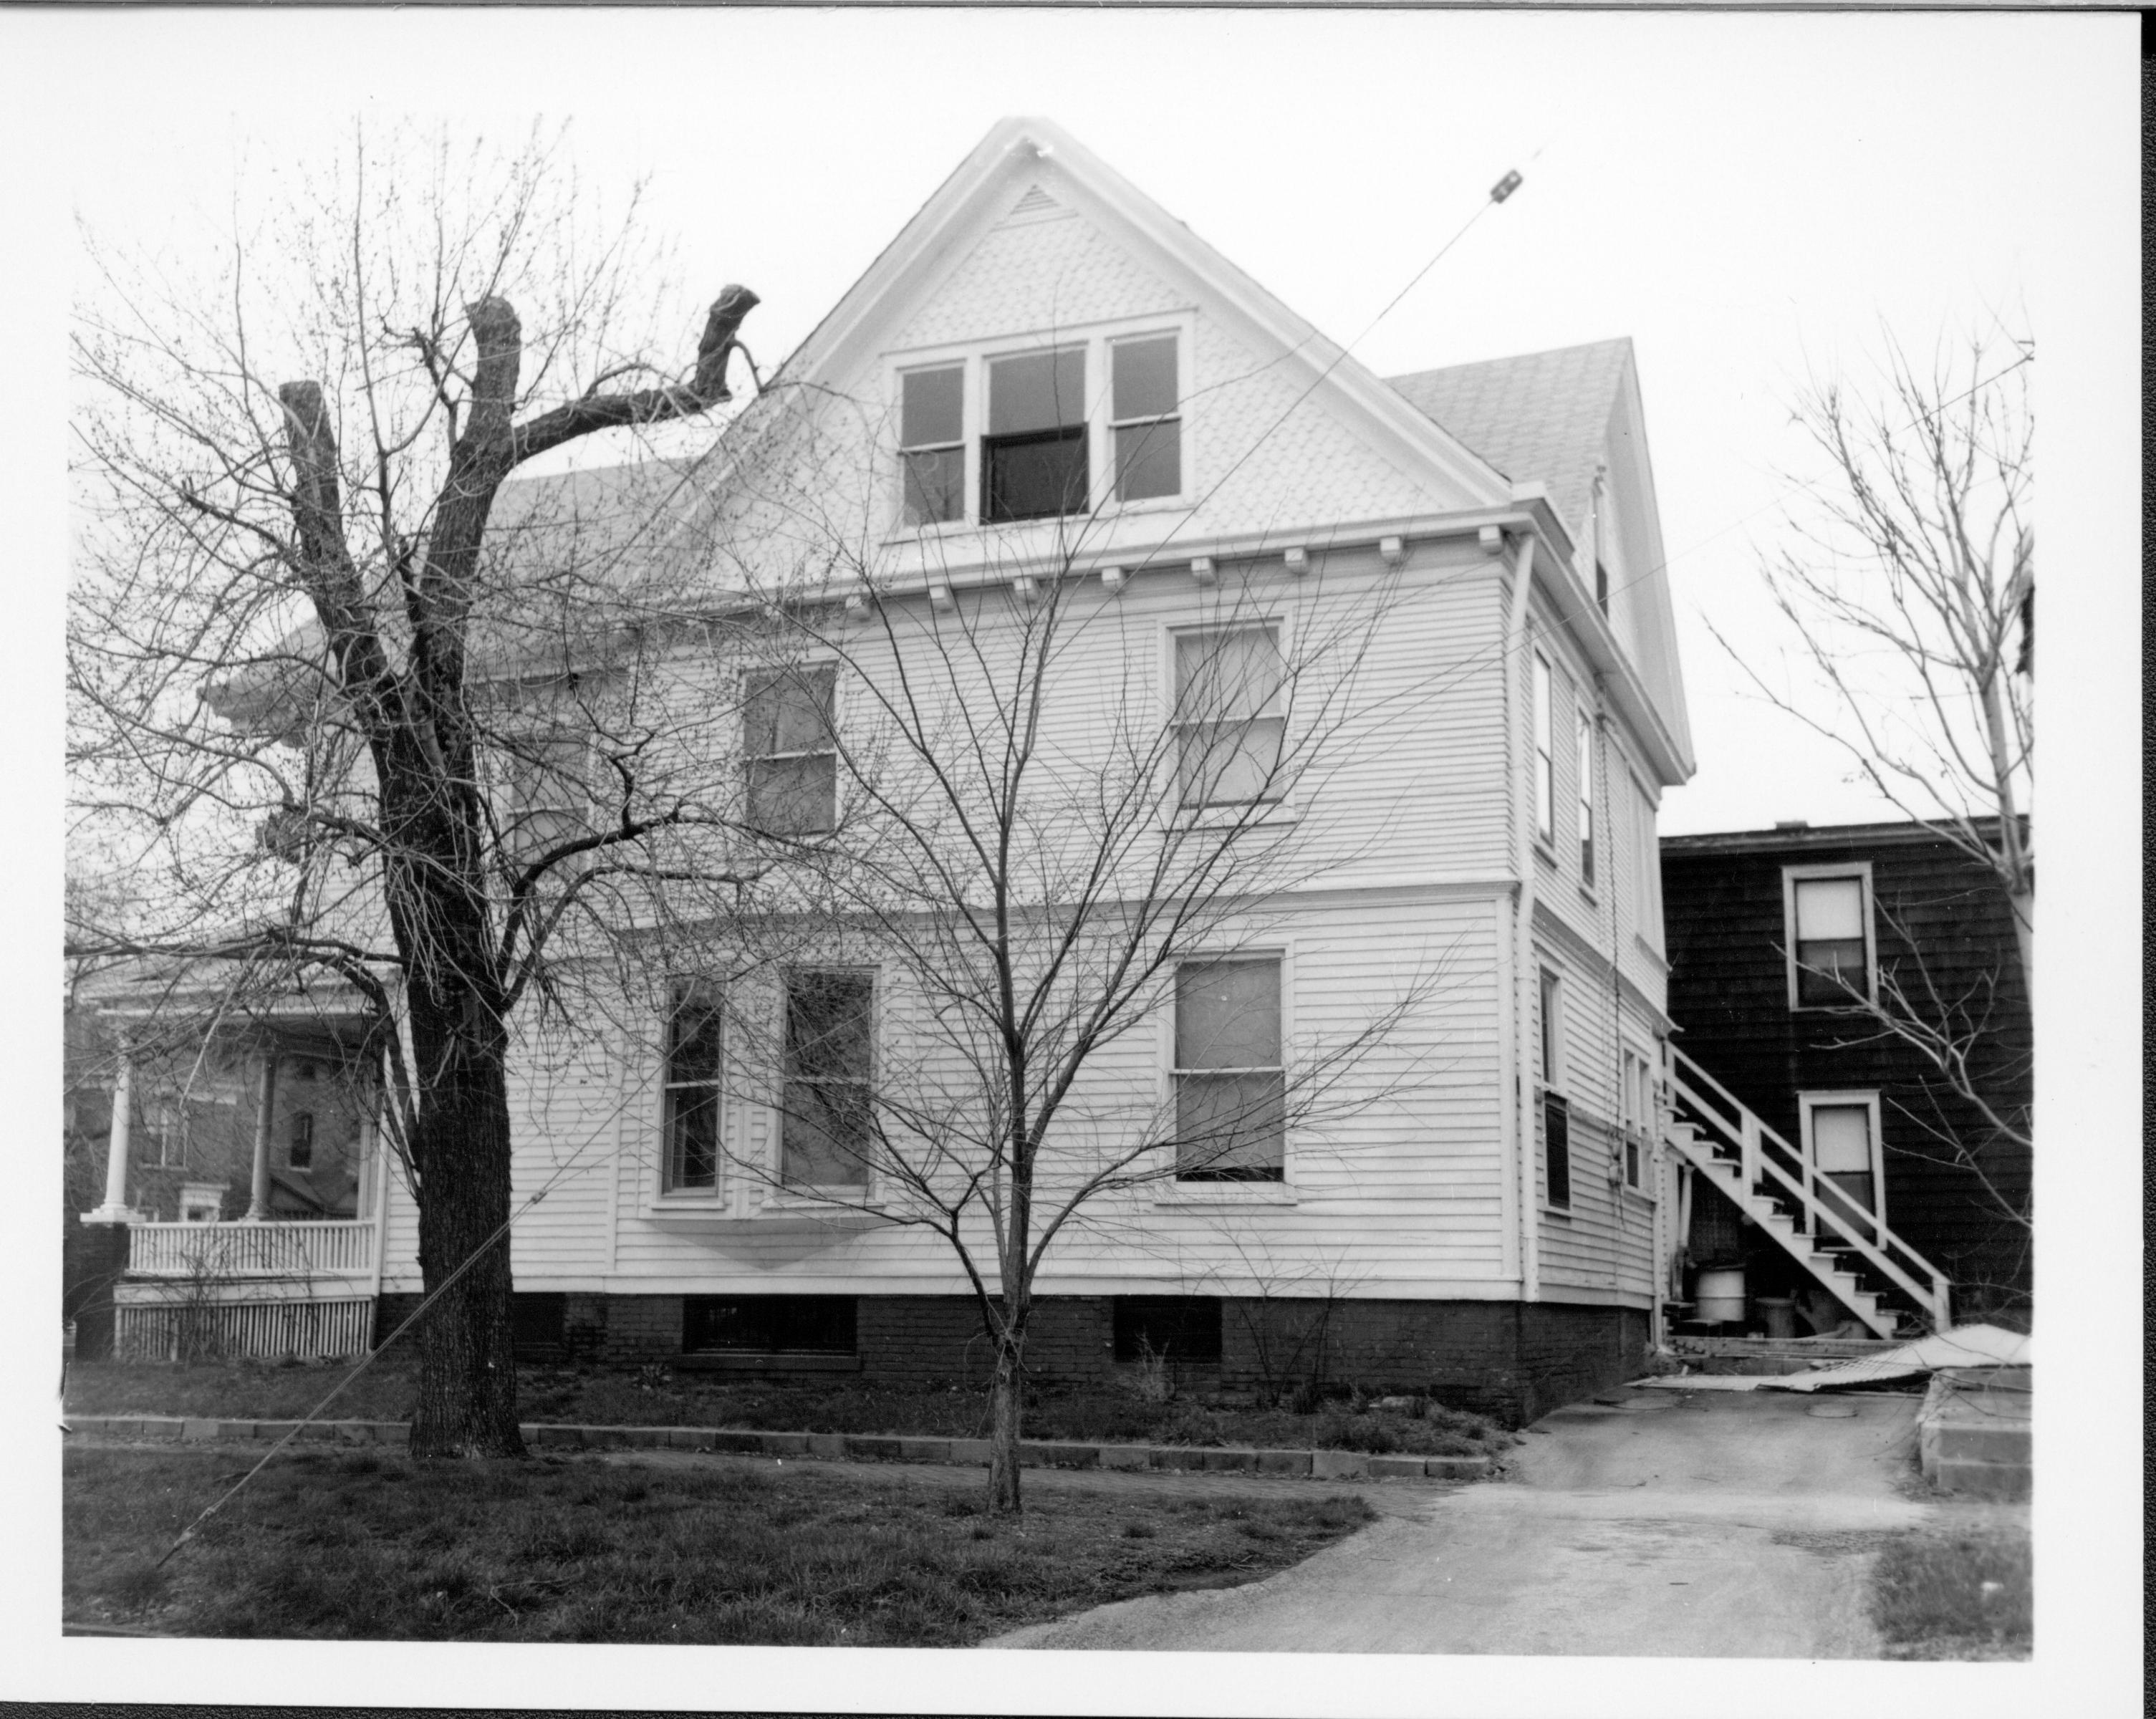 Home owned by William Hermes in use as apartments, South elevation along Jackson Street, Block 7, Lot 8.  House in background owned by Eleanor Pruett, Now the location of the Visitor Center 5 Hermes, Pruett, Jackson Street, Visitor Center